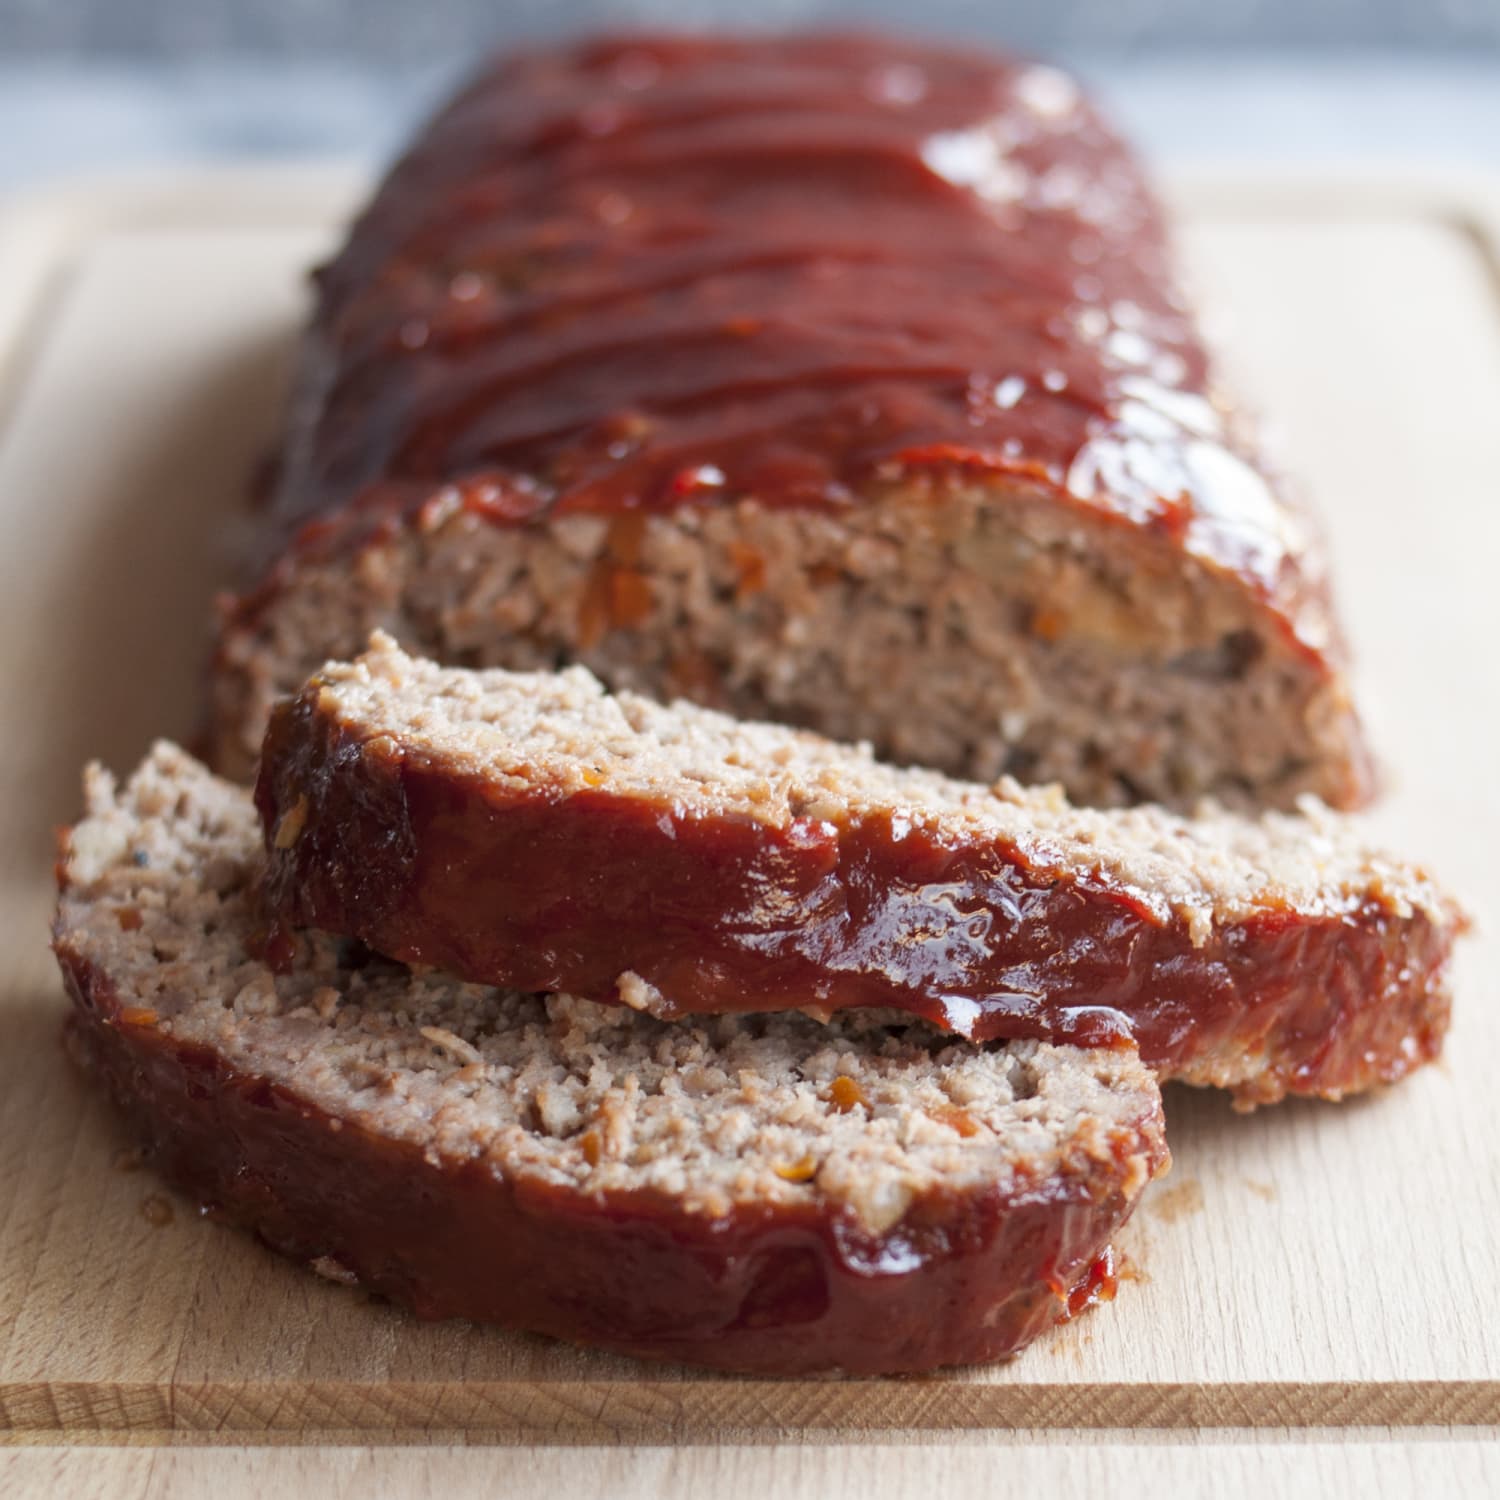 How To Make Meatloaf From Scratch Kitchn,What Temp To Cook Pork Tenderloin